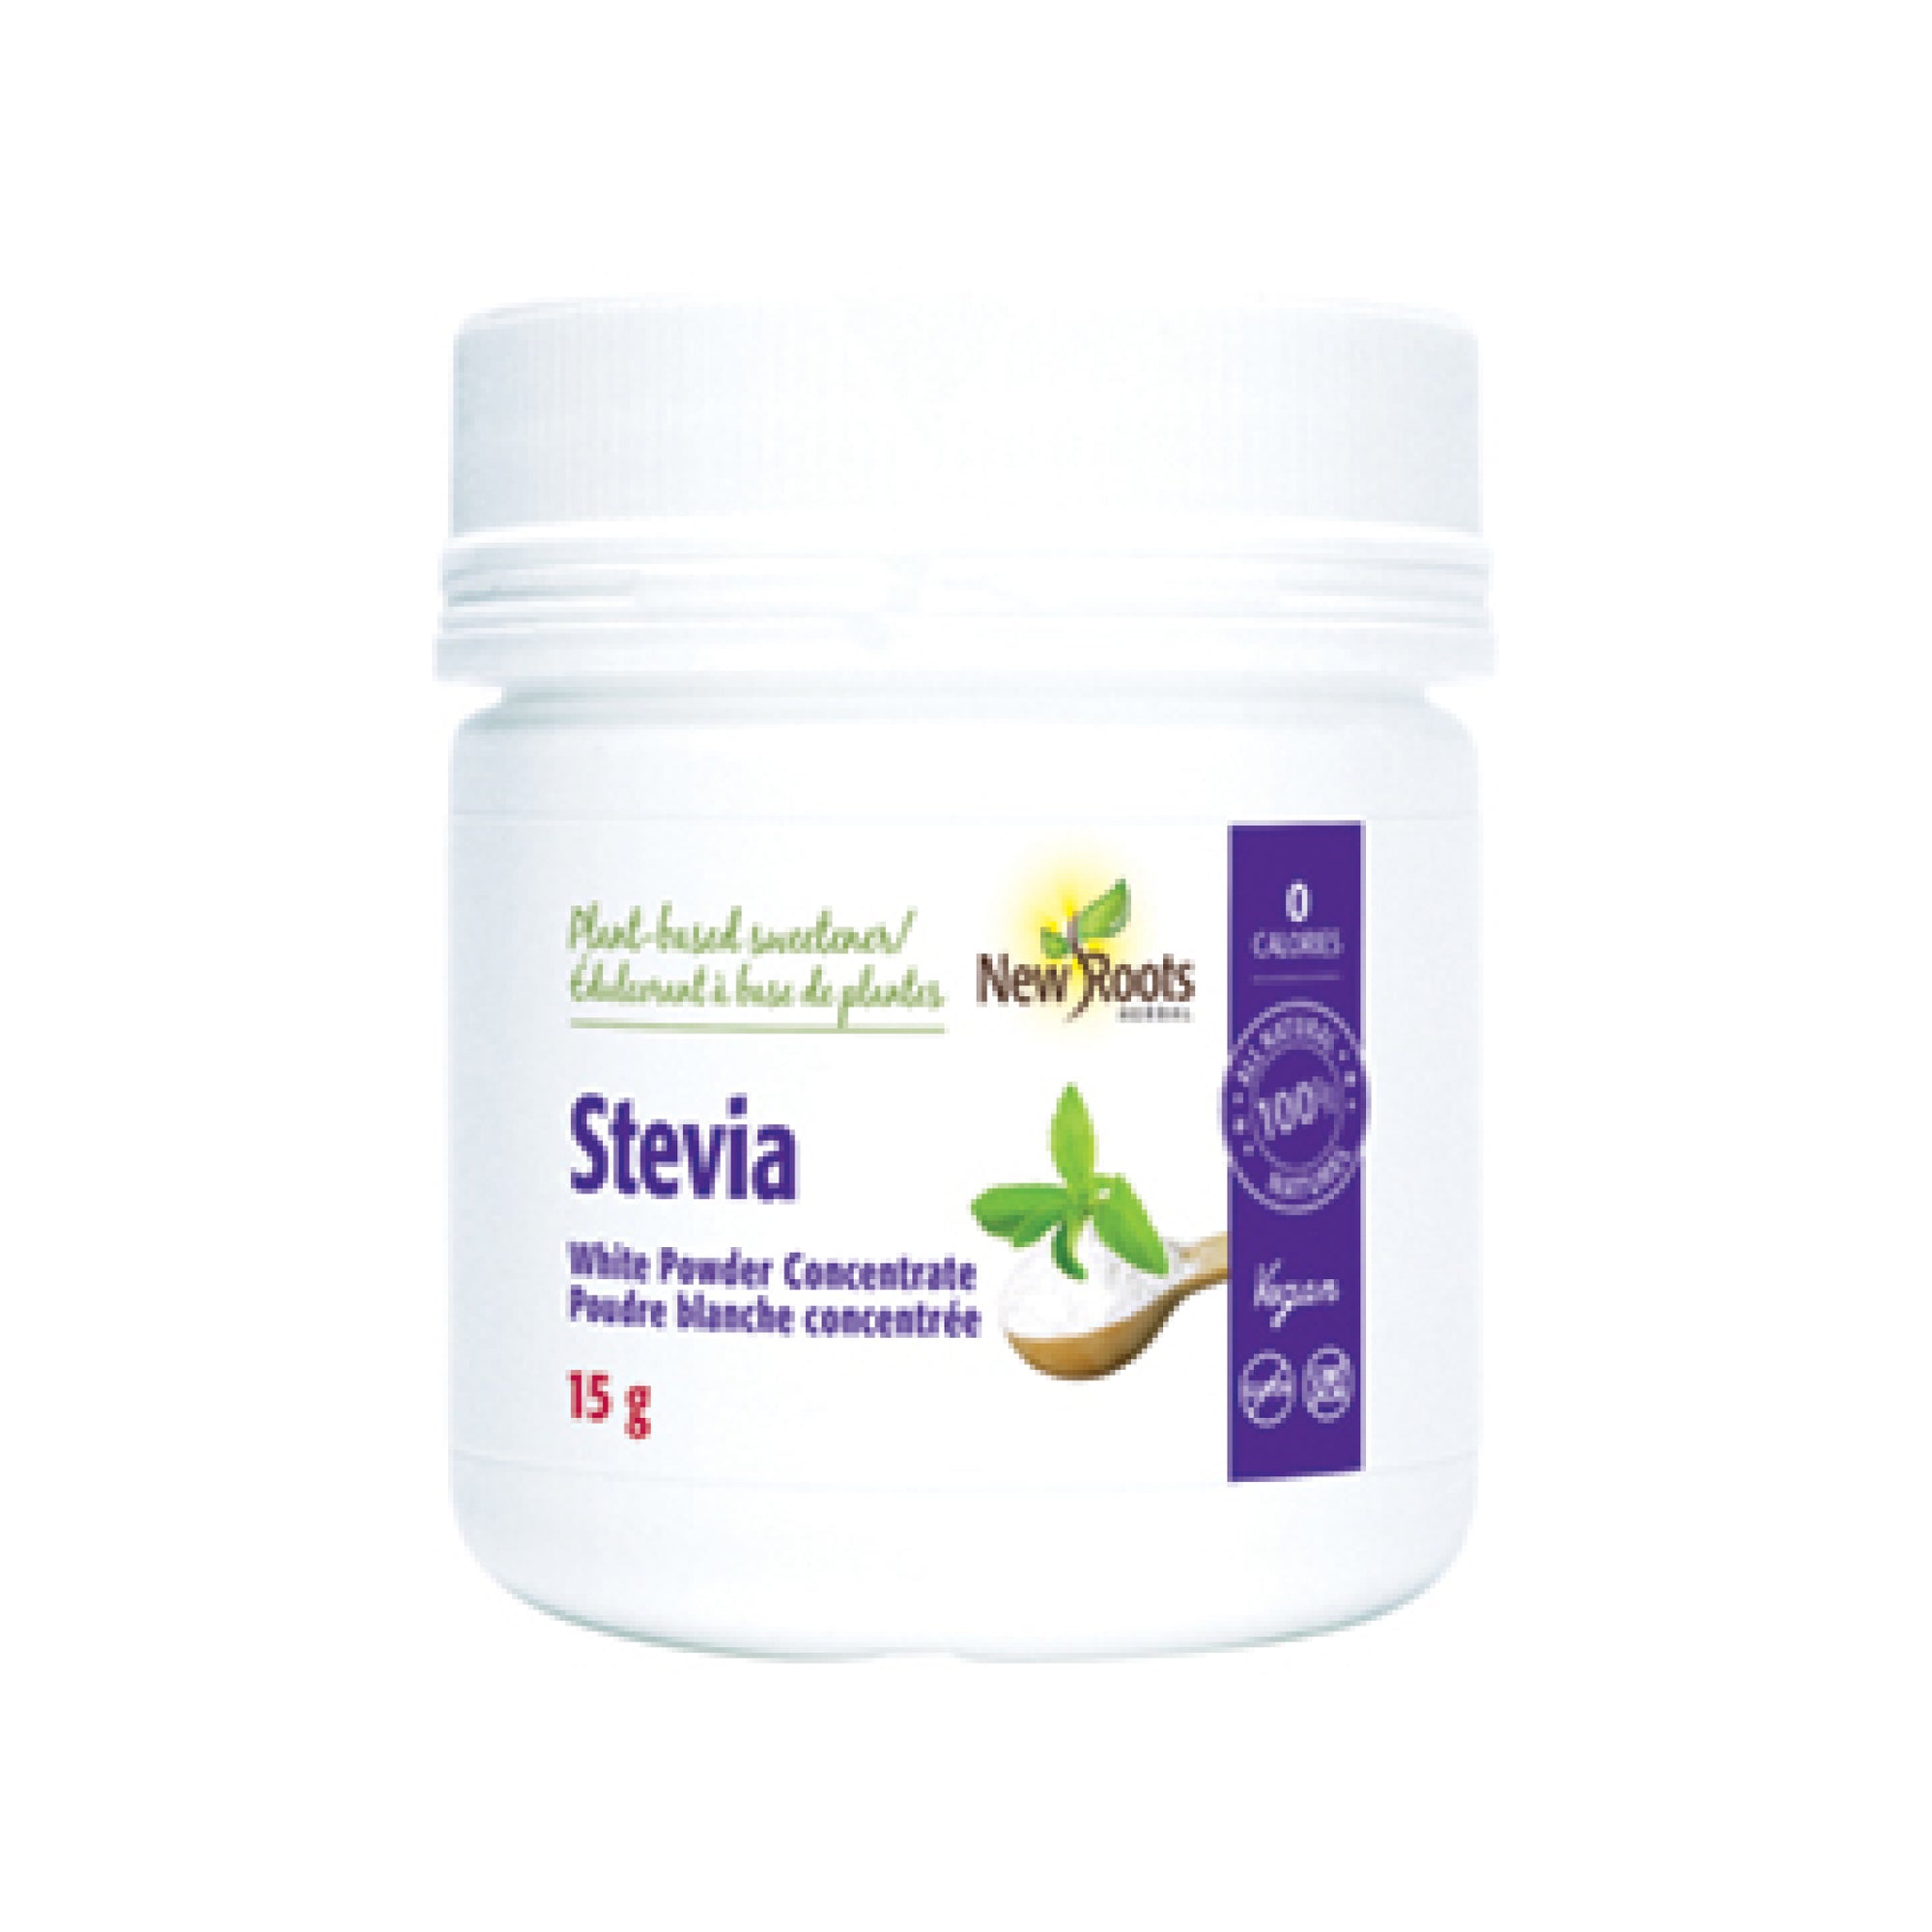 New Roots Stevia White Powder Concentrate 15g